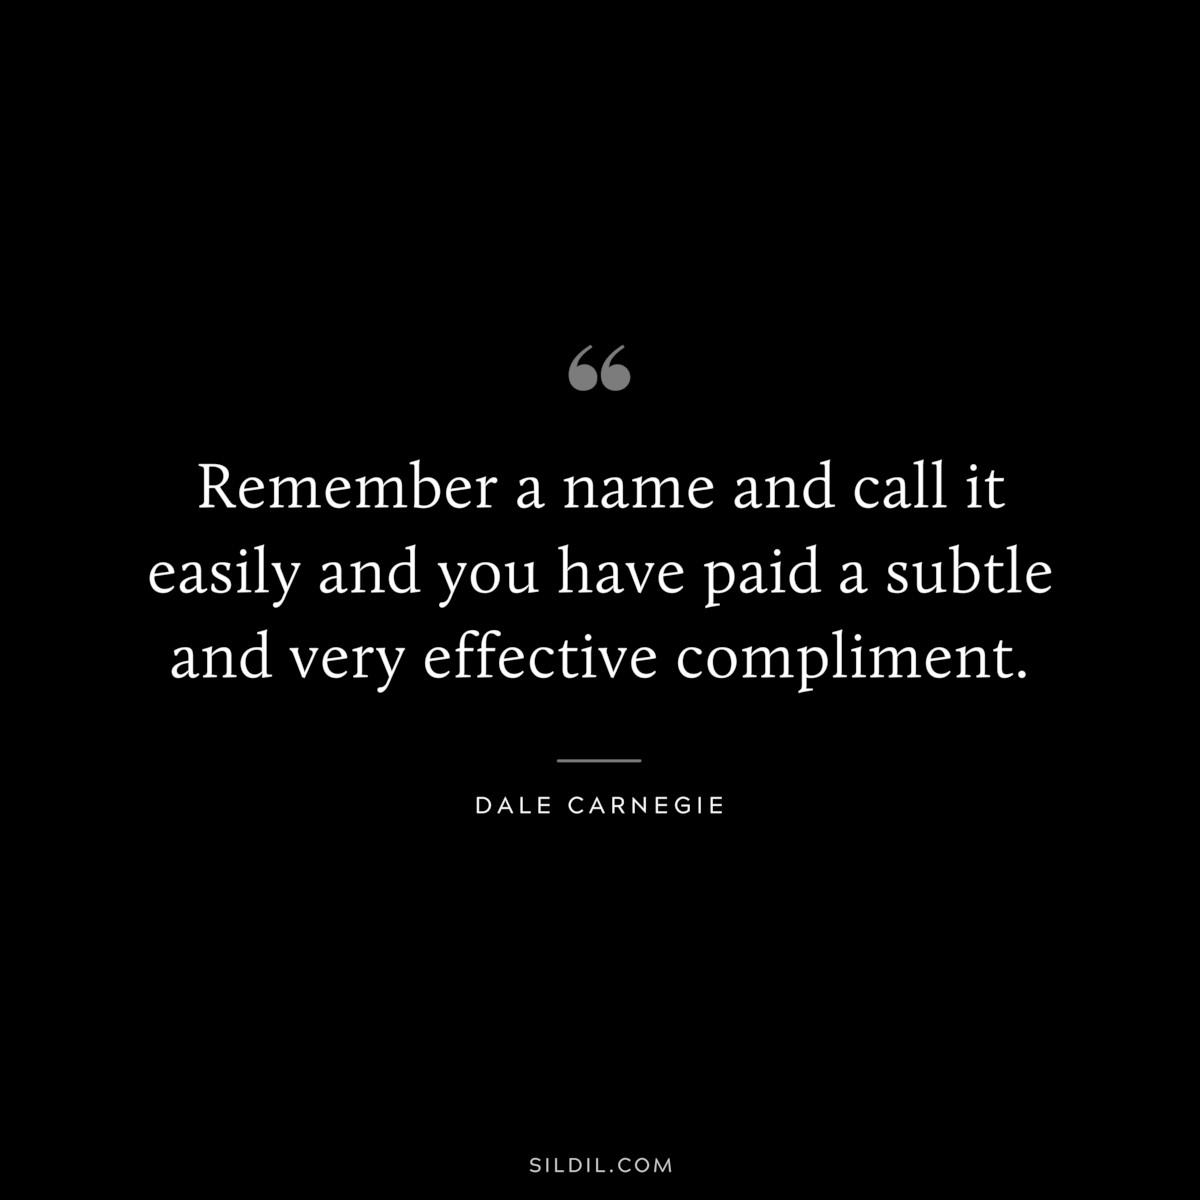 Remember a name and call it easily and you have paid a subtle and very effective compliment.― Dale Carnegie